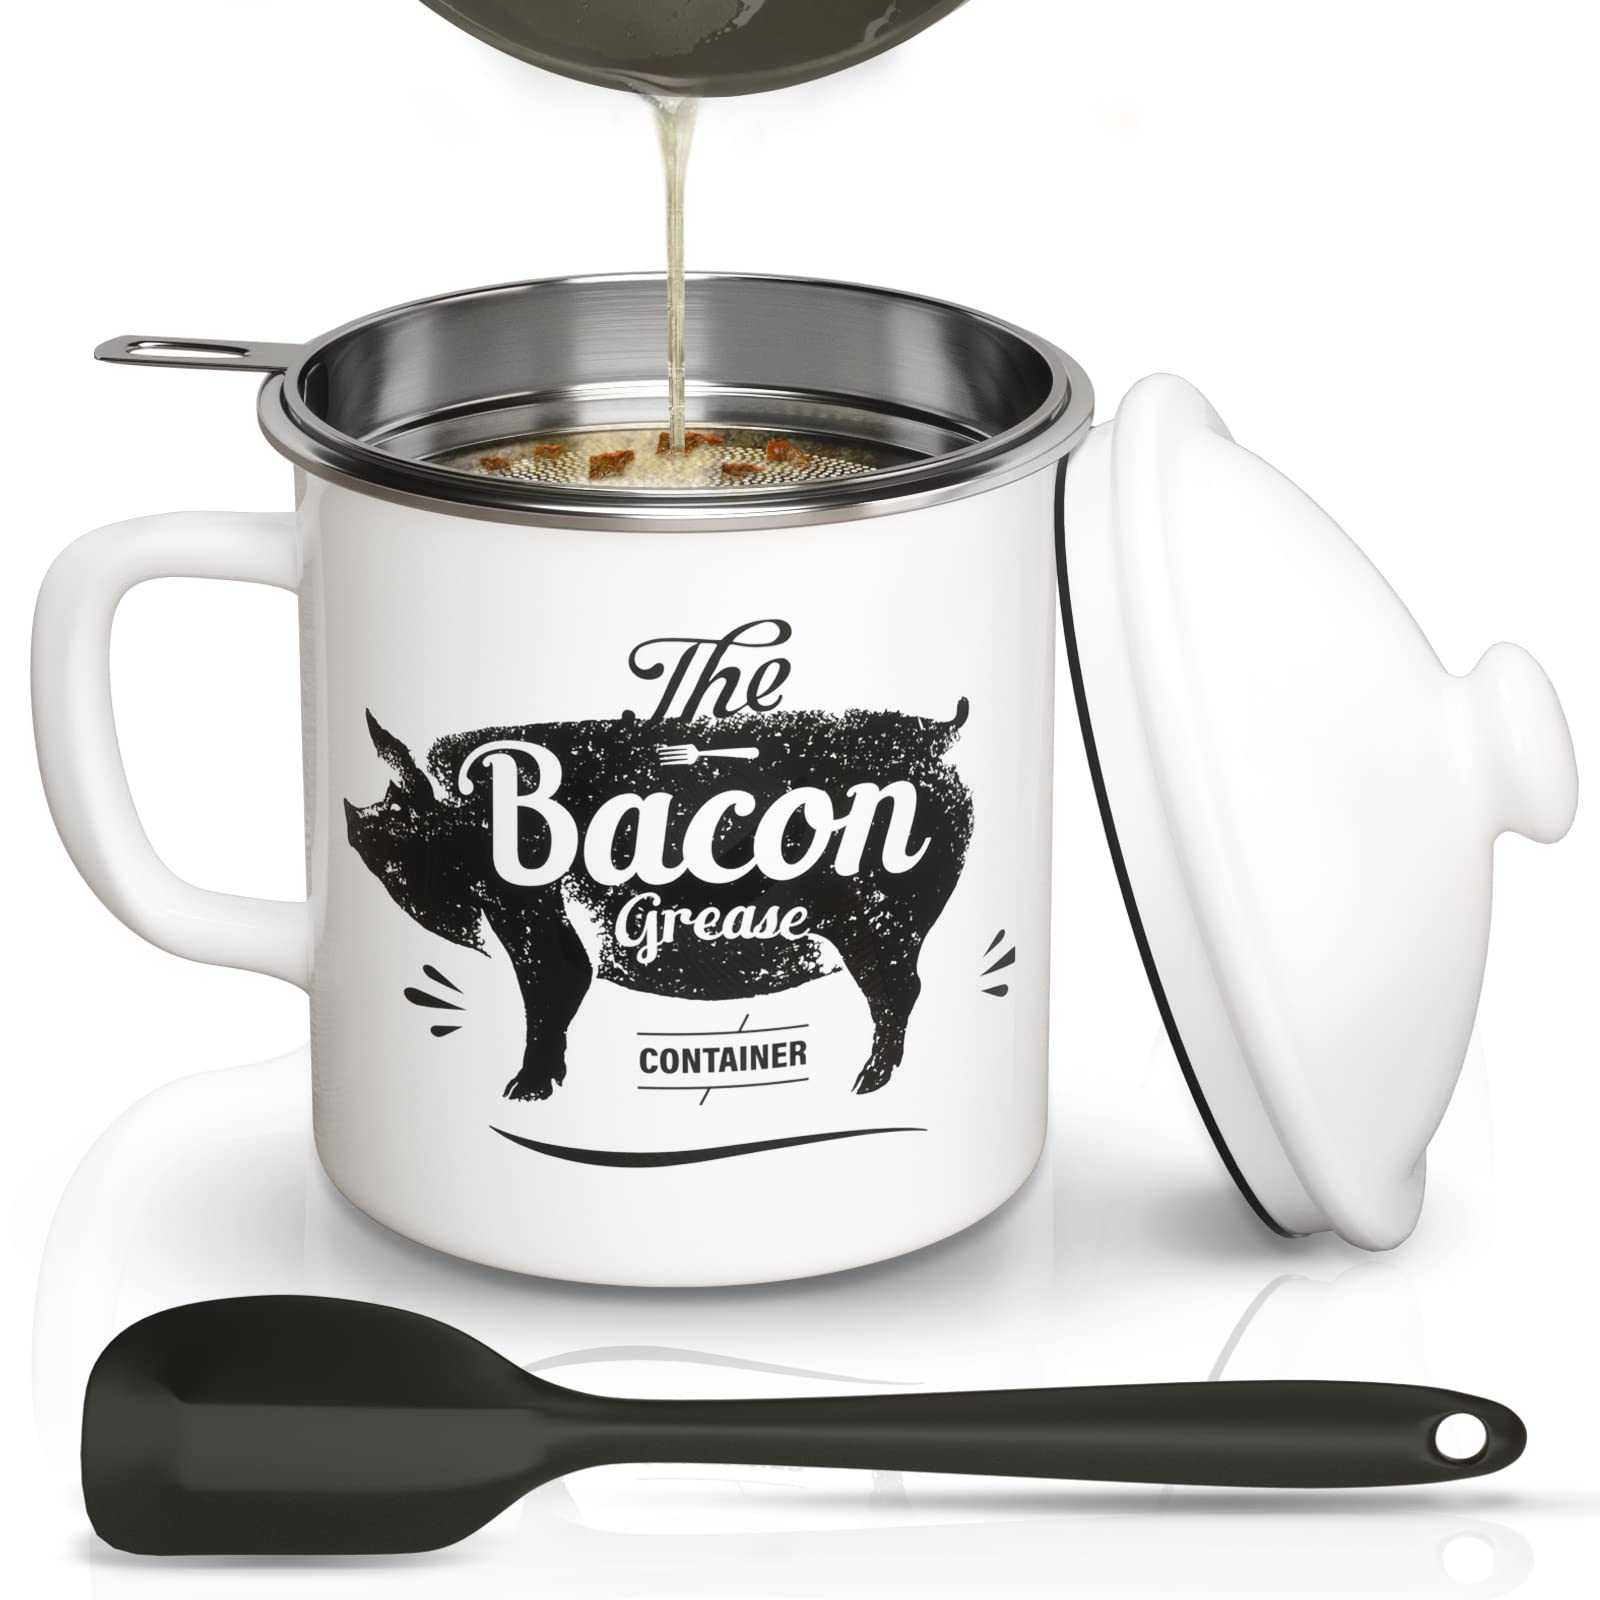 Zulay Kitchen Bacon Grease Container with Strainer 1L Stainless